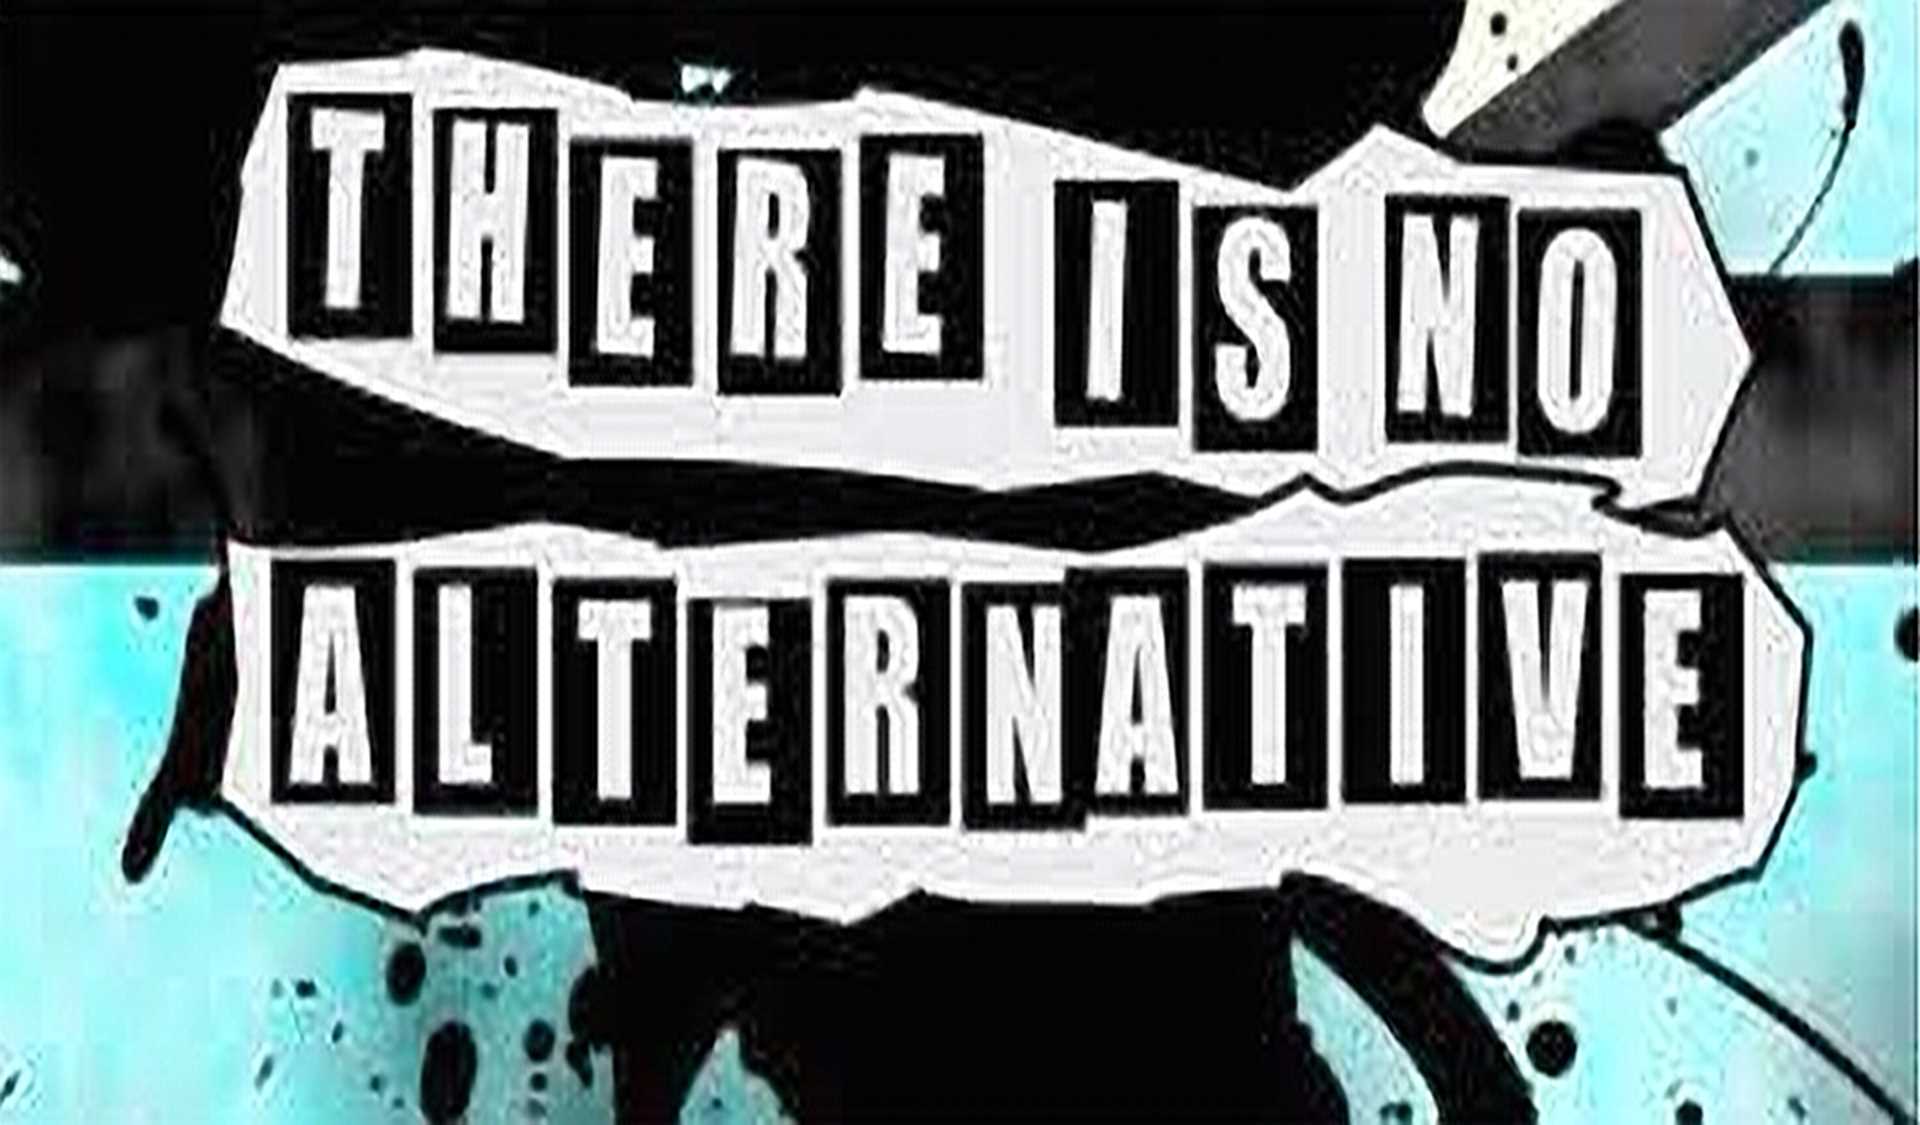 « There is no alternative »